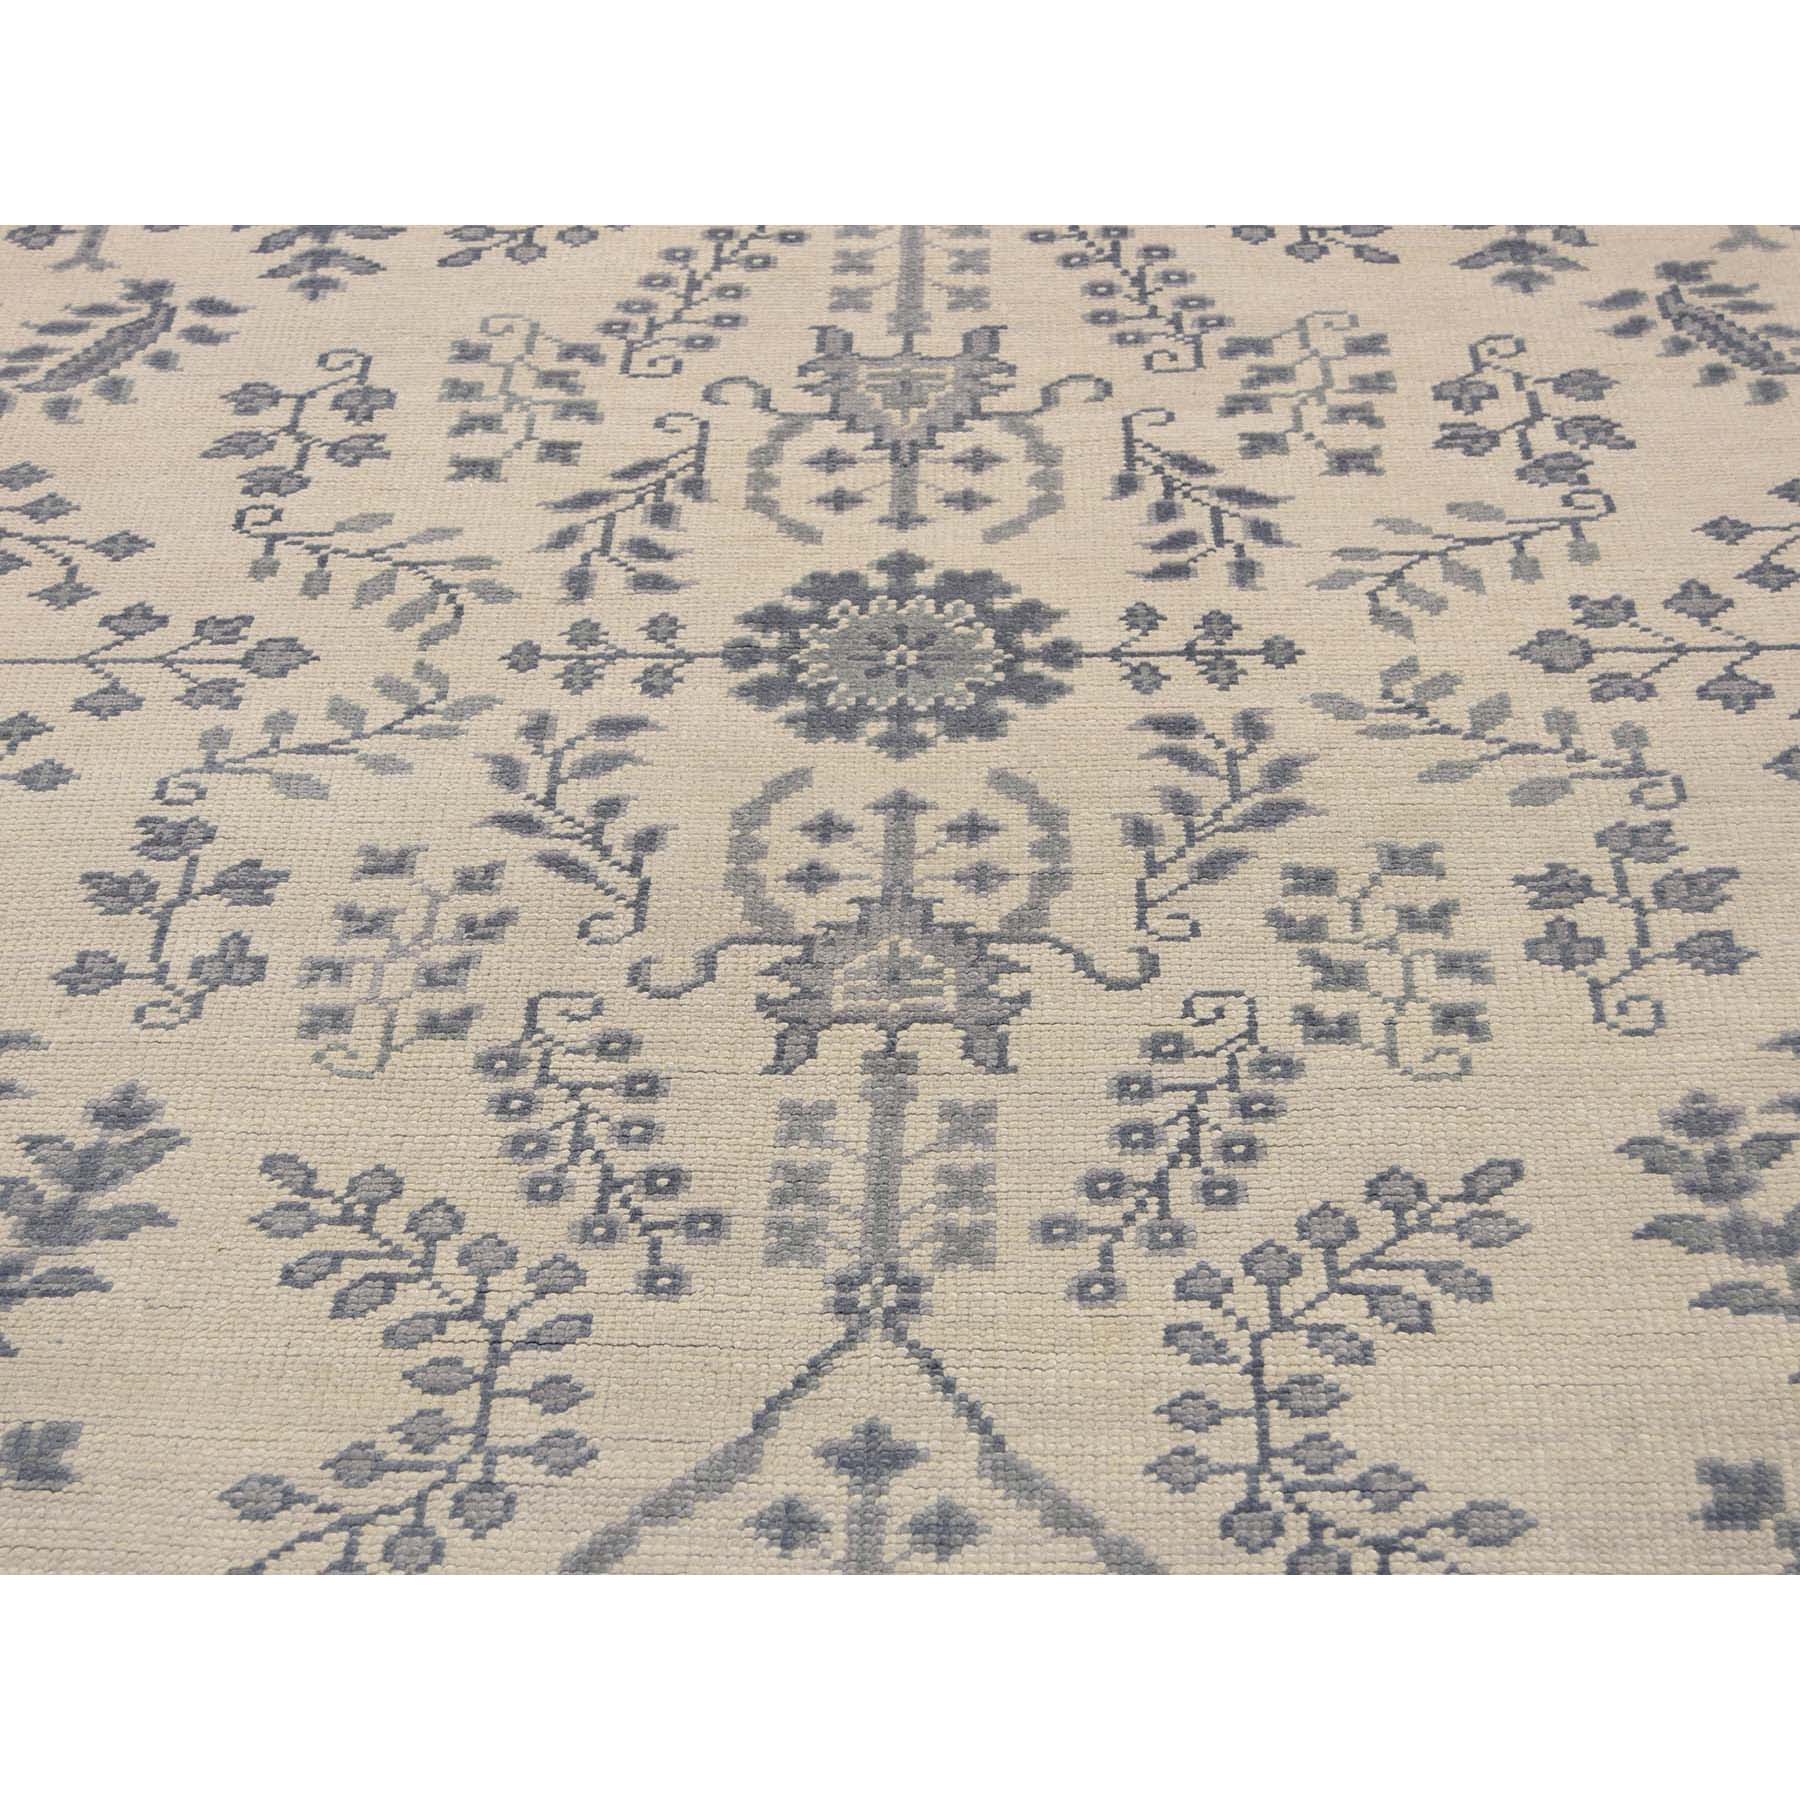 8-1 x9-10  Hand-Knotted Turkish Knot Oushak Pure Wool Oriental Rug 